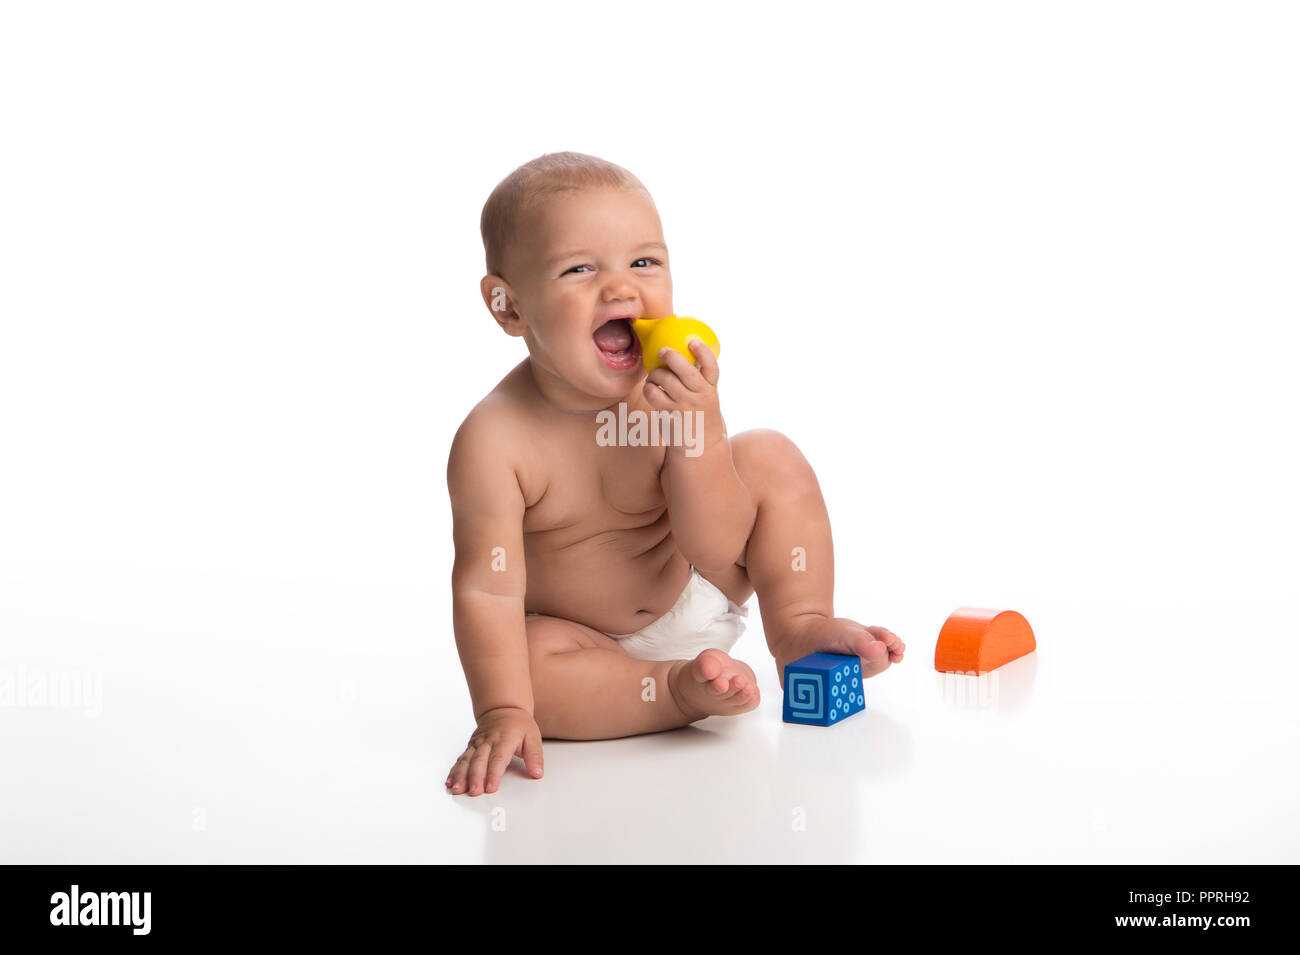 A laughing seven month old baby boy playing with wooden blocks. Shot in the studio on a white, seamless backdrop. Stock Photo